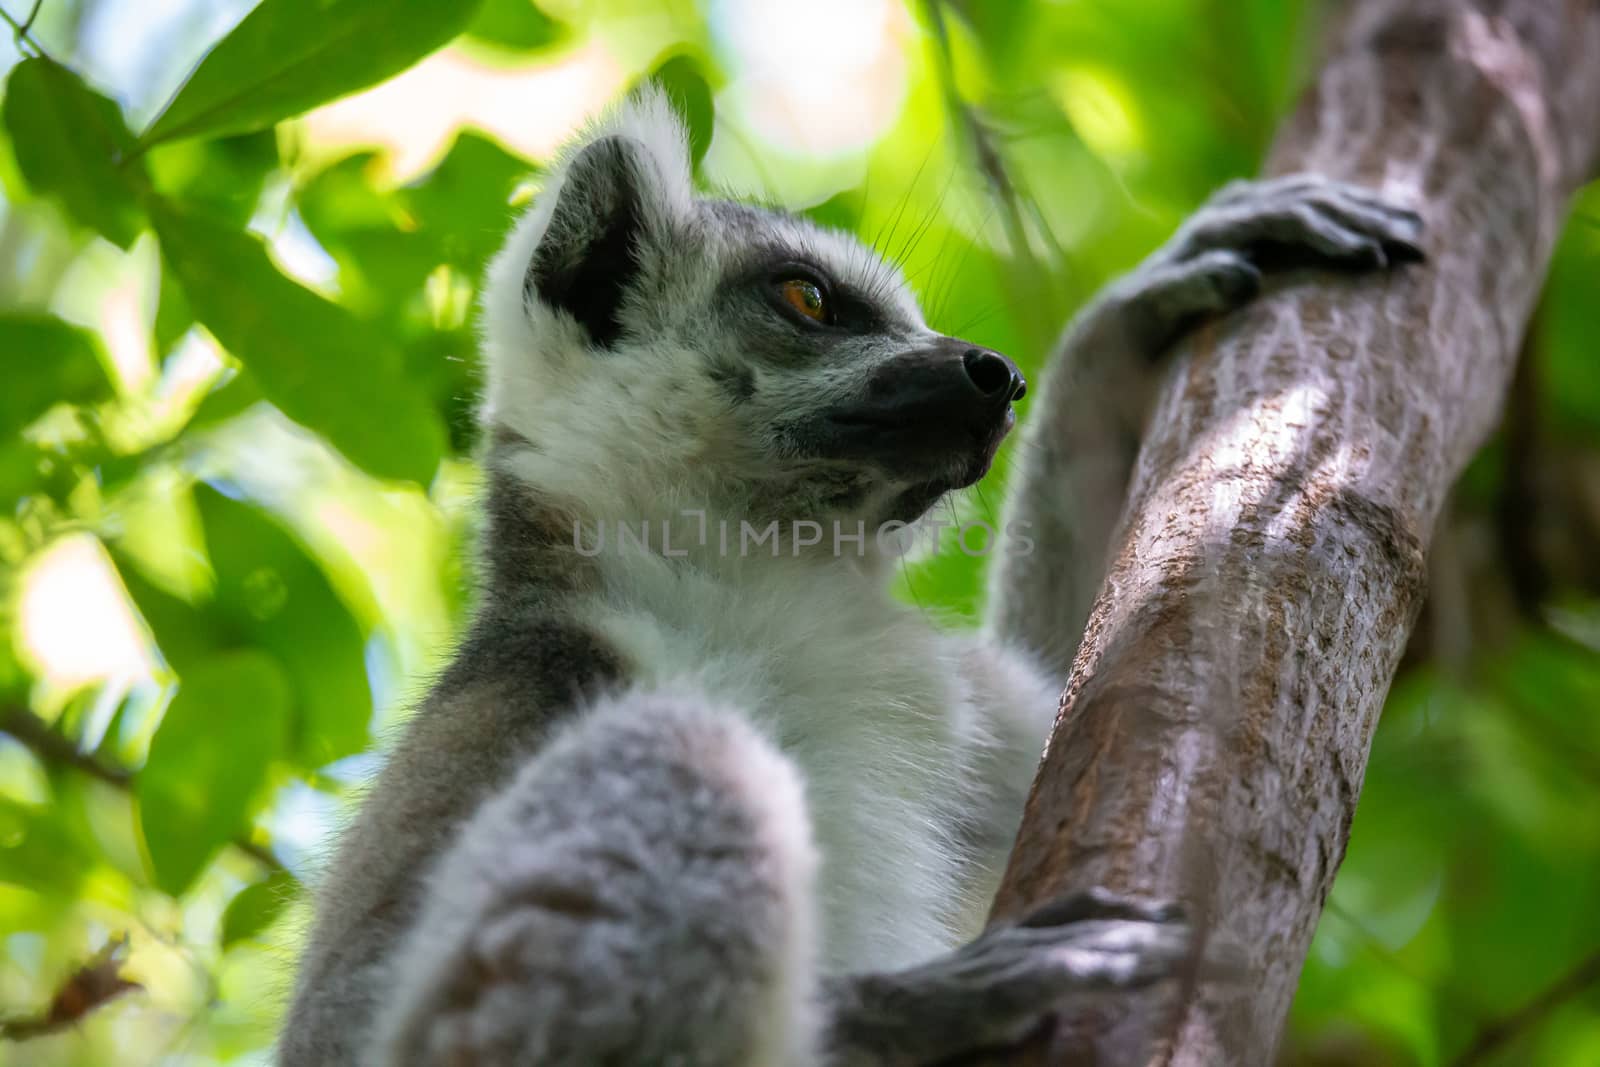 One close-up of a lemur on a tree